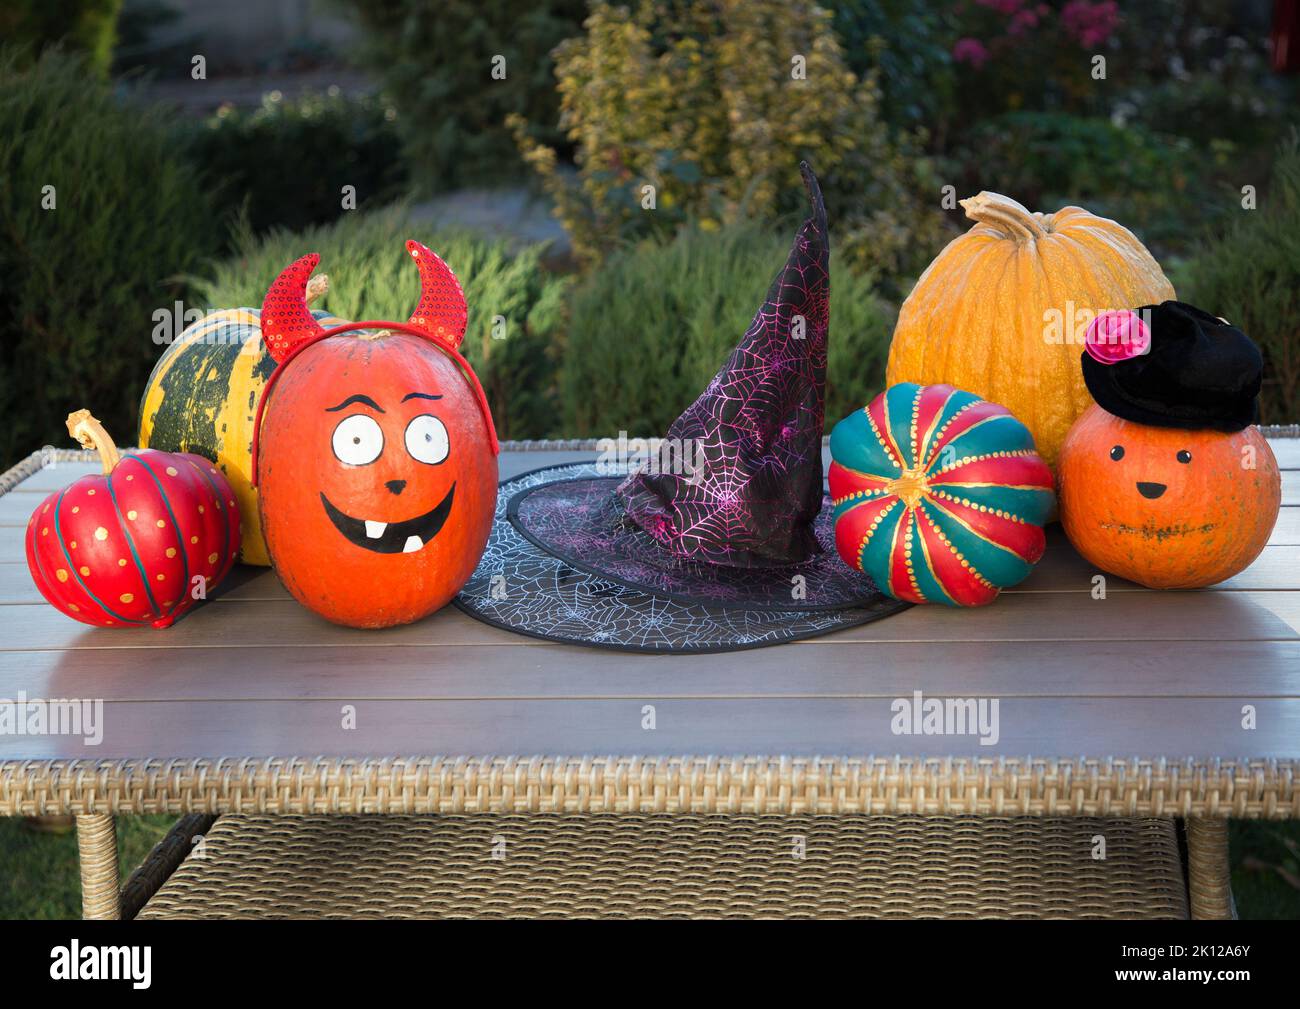 lot of various painted decorative colored pumpkins prepared for Halloween lie on the table in the garden as decoration for the holiday Stock Photo